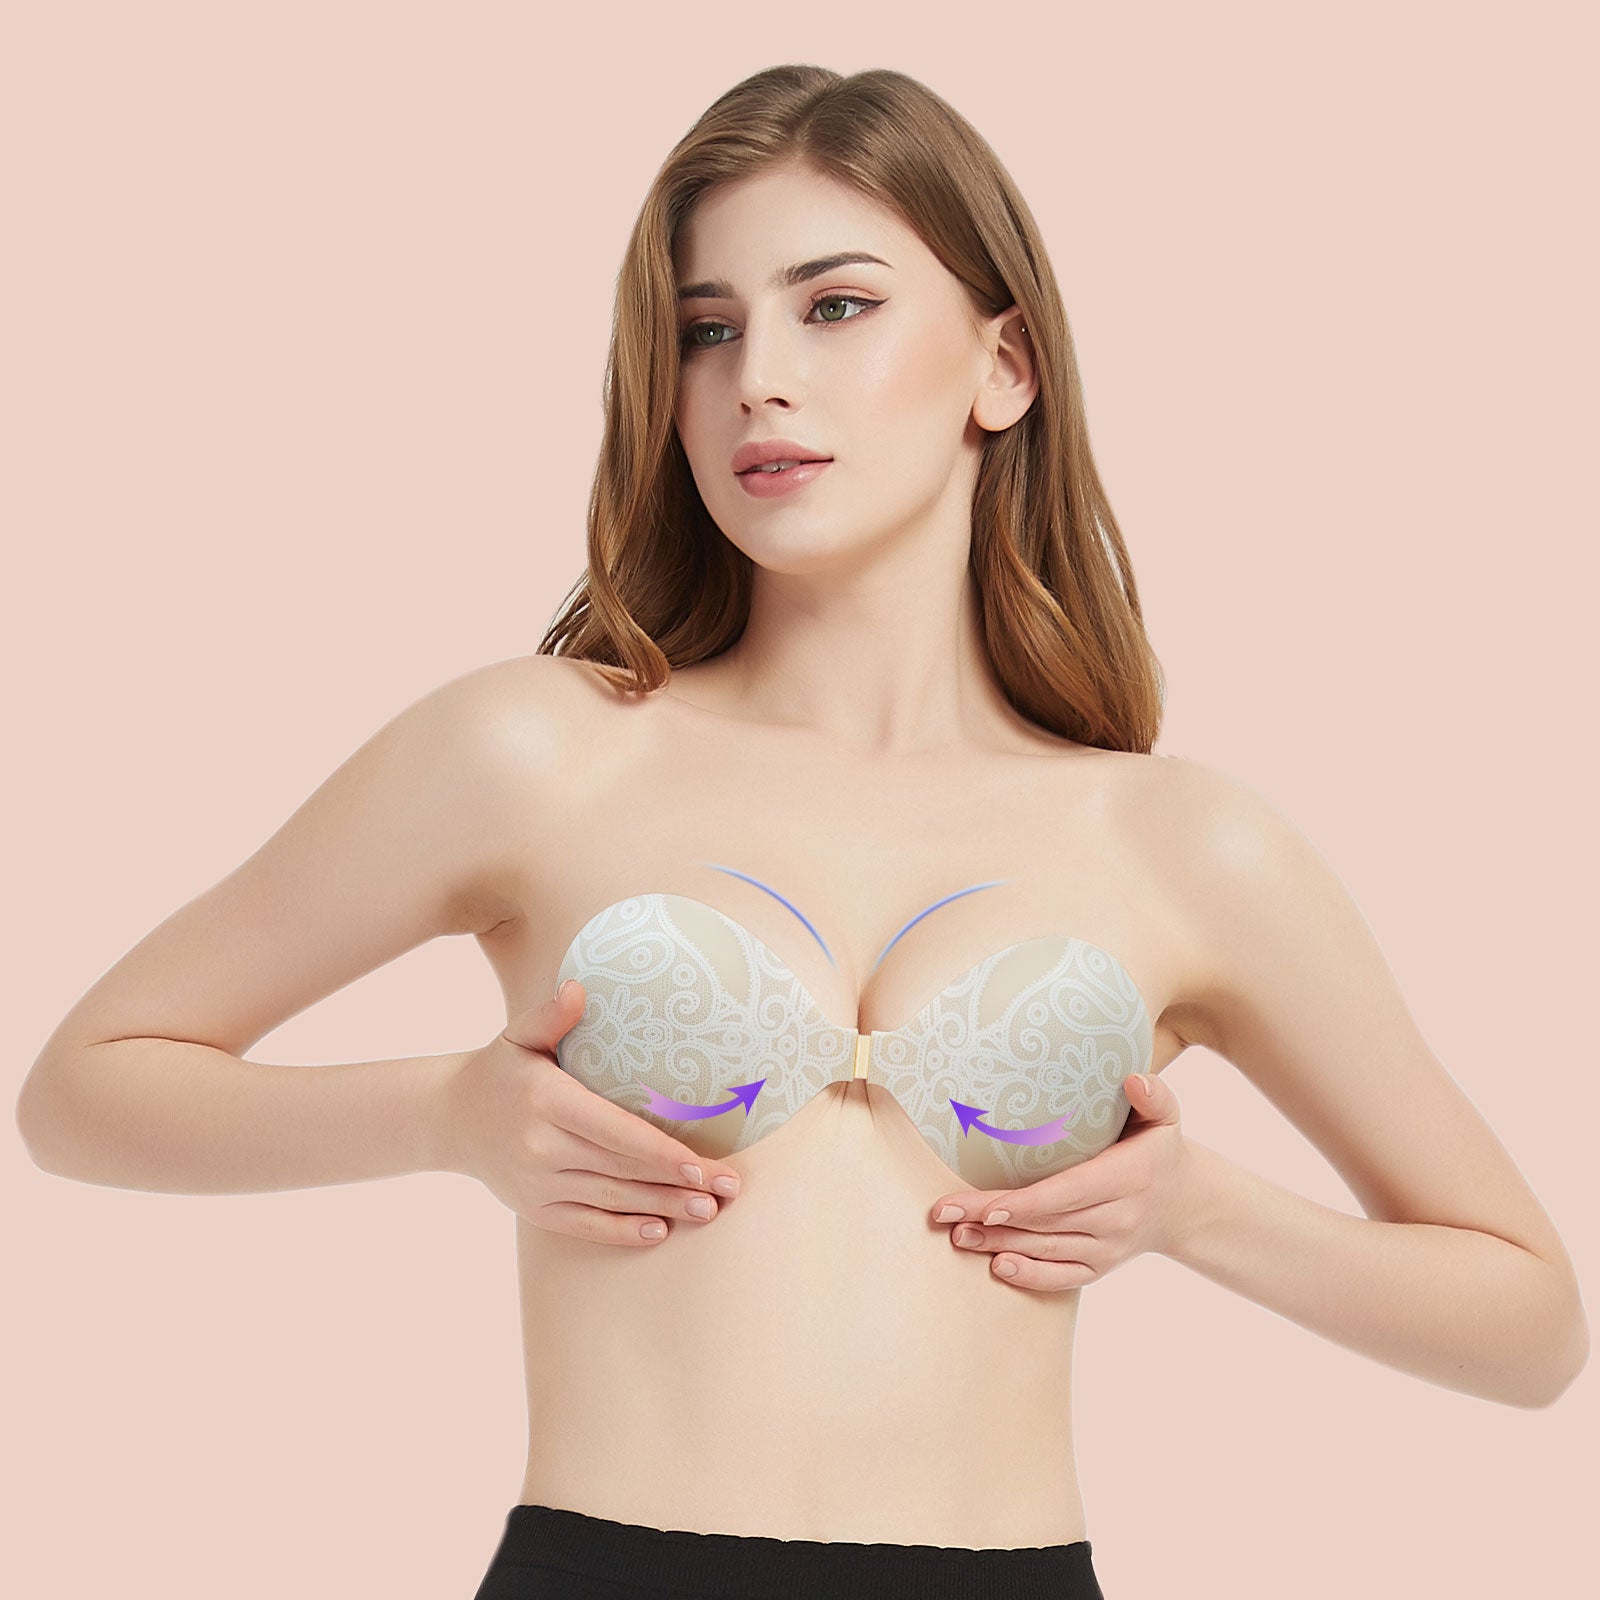 Women's Backless Bra for Dress,Reusable Silicone Push Up Invisible